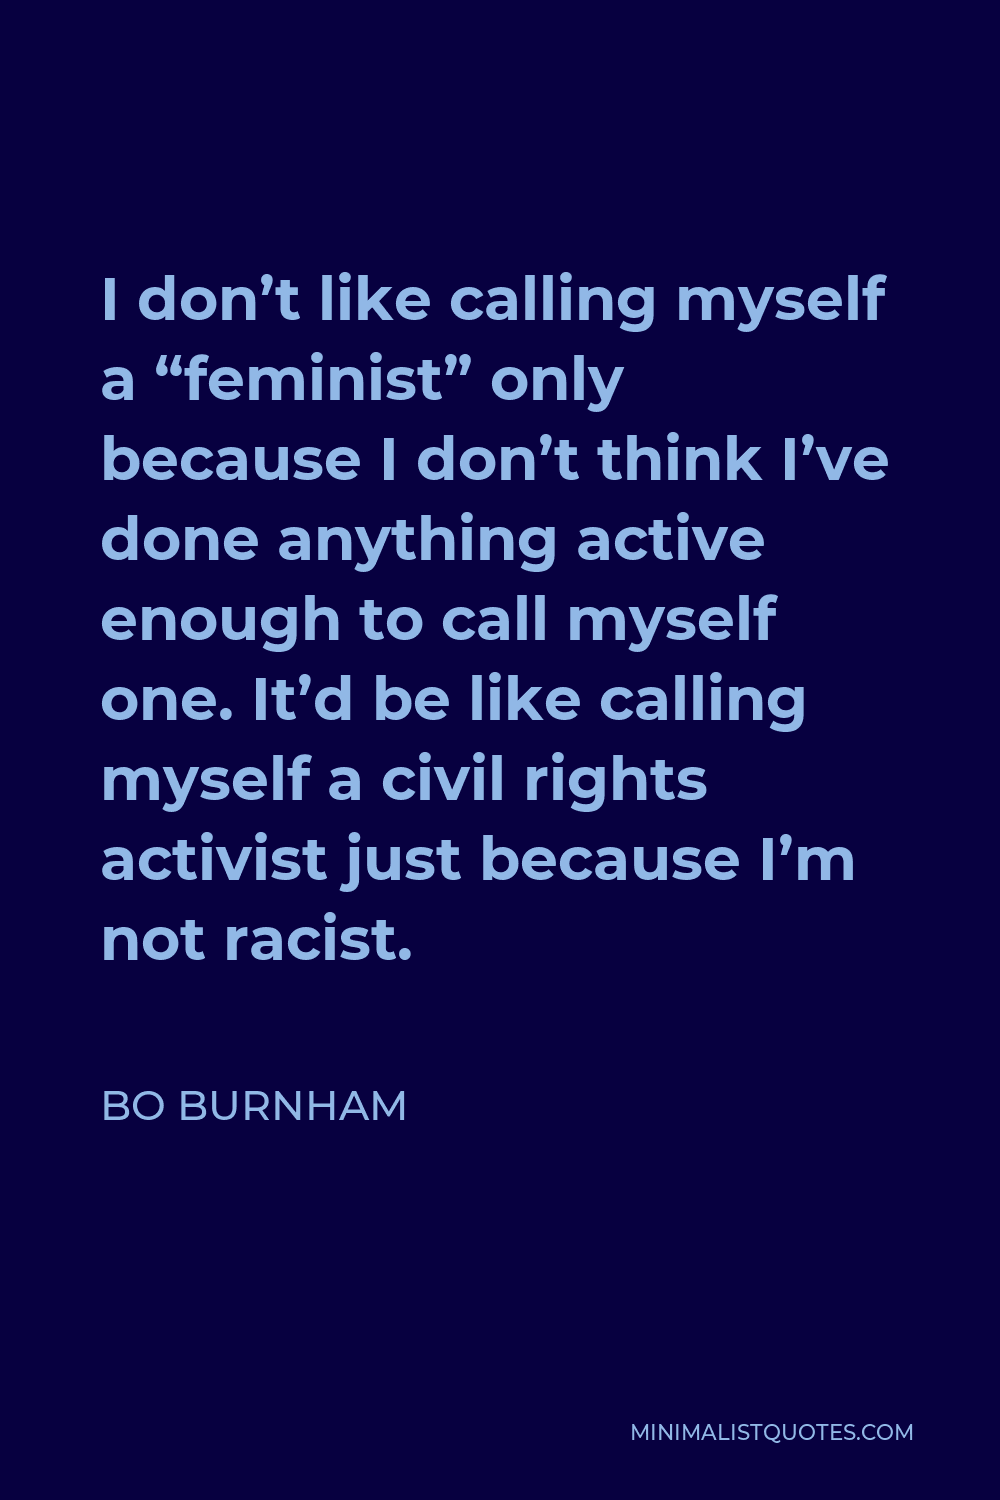 Bo Burnham Quote - I don’t like calling myself a “feminist” only because I don’t think I’ve done anything active enough to call myself one. It’d be like calling myself a civil rights activist just because I’m not racist.